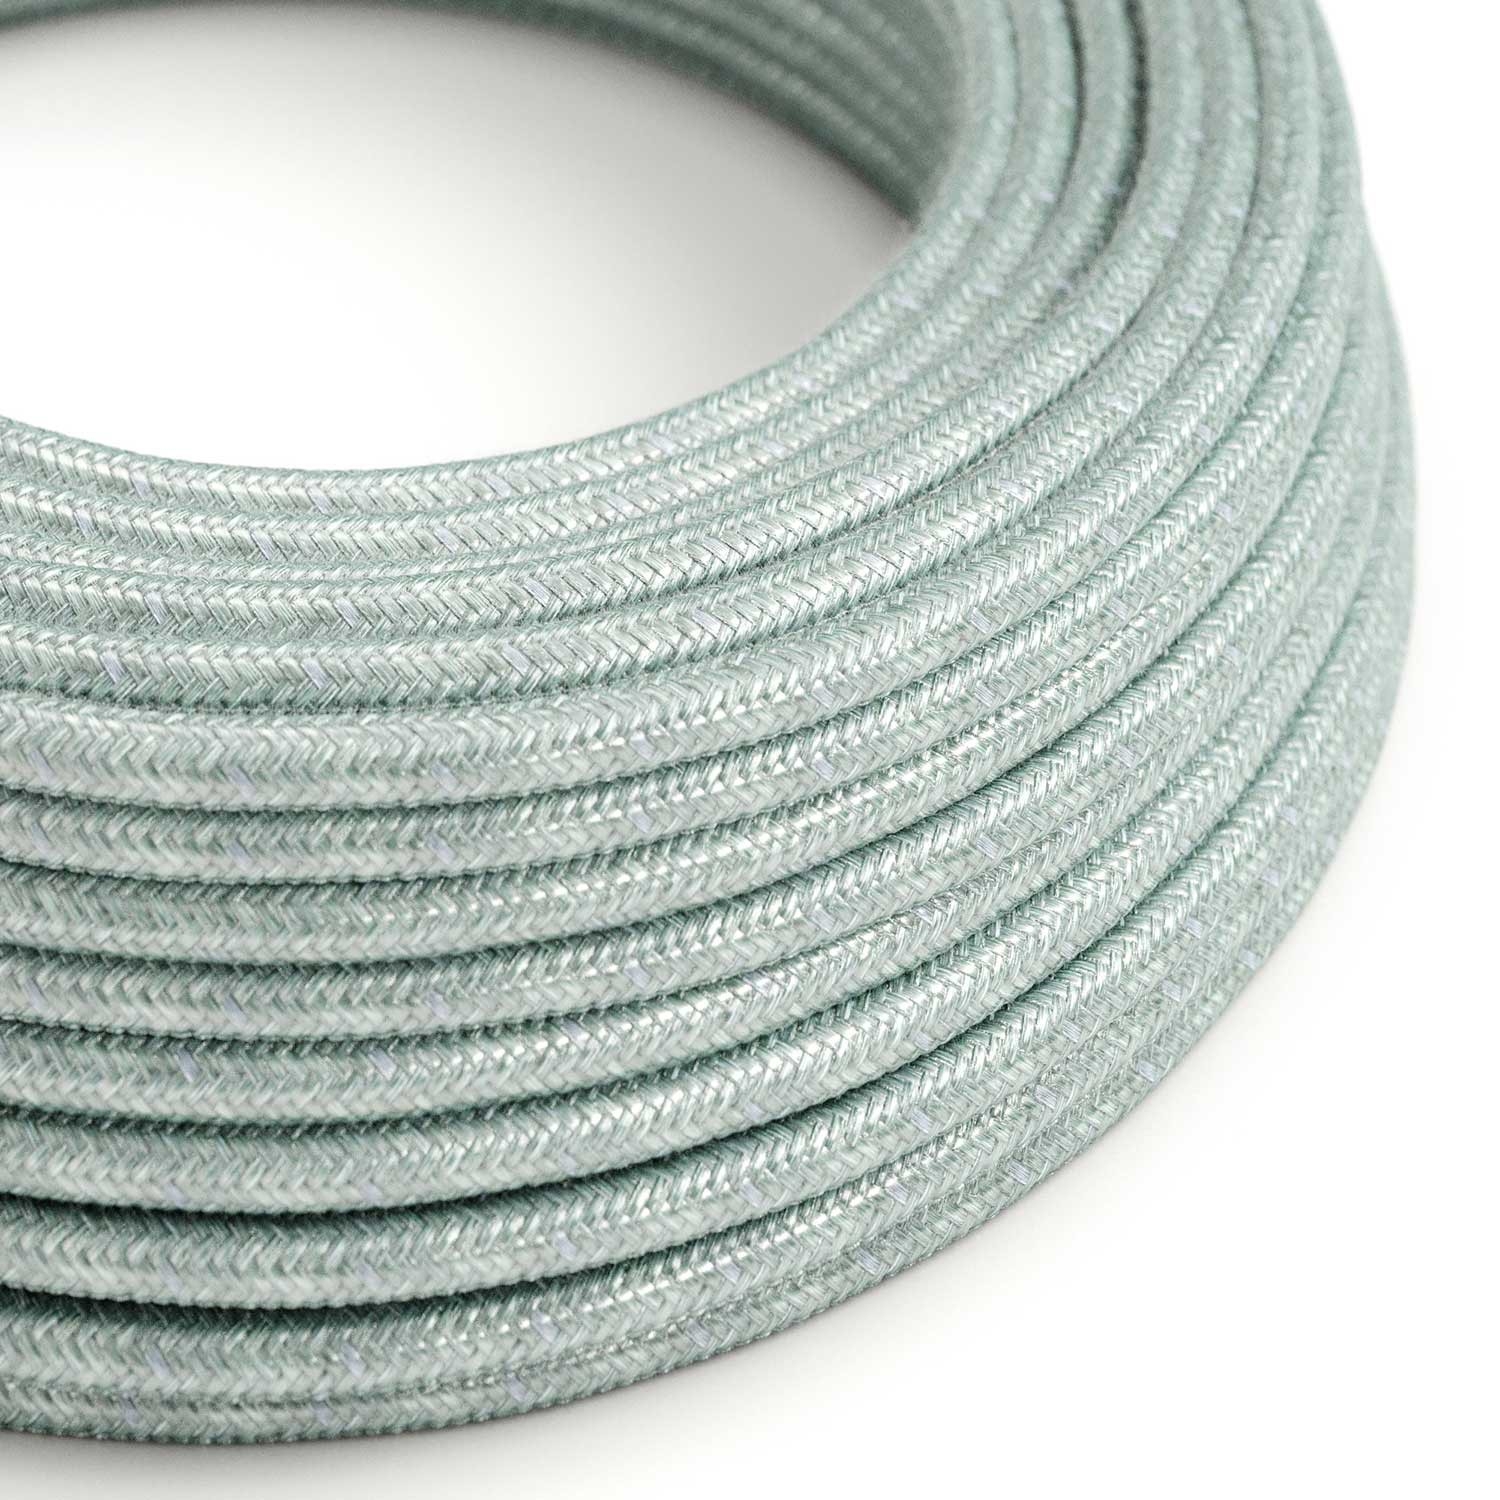 RX12 Blue Haze Round Cotton Electrical Fabric Cloth Cord Cable